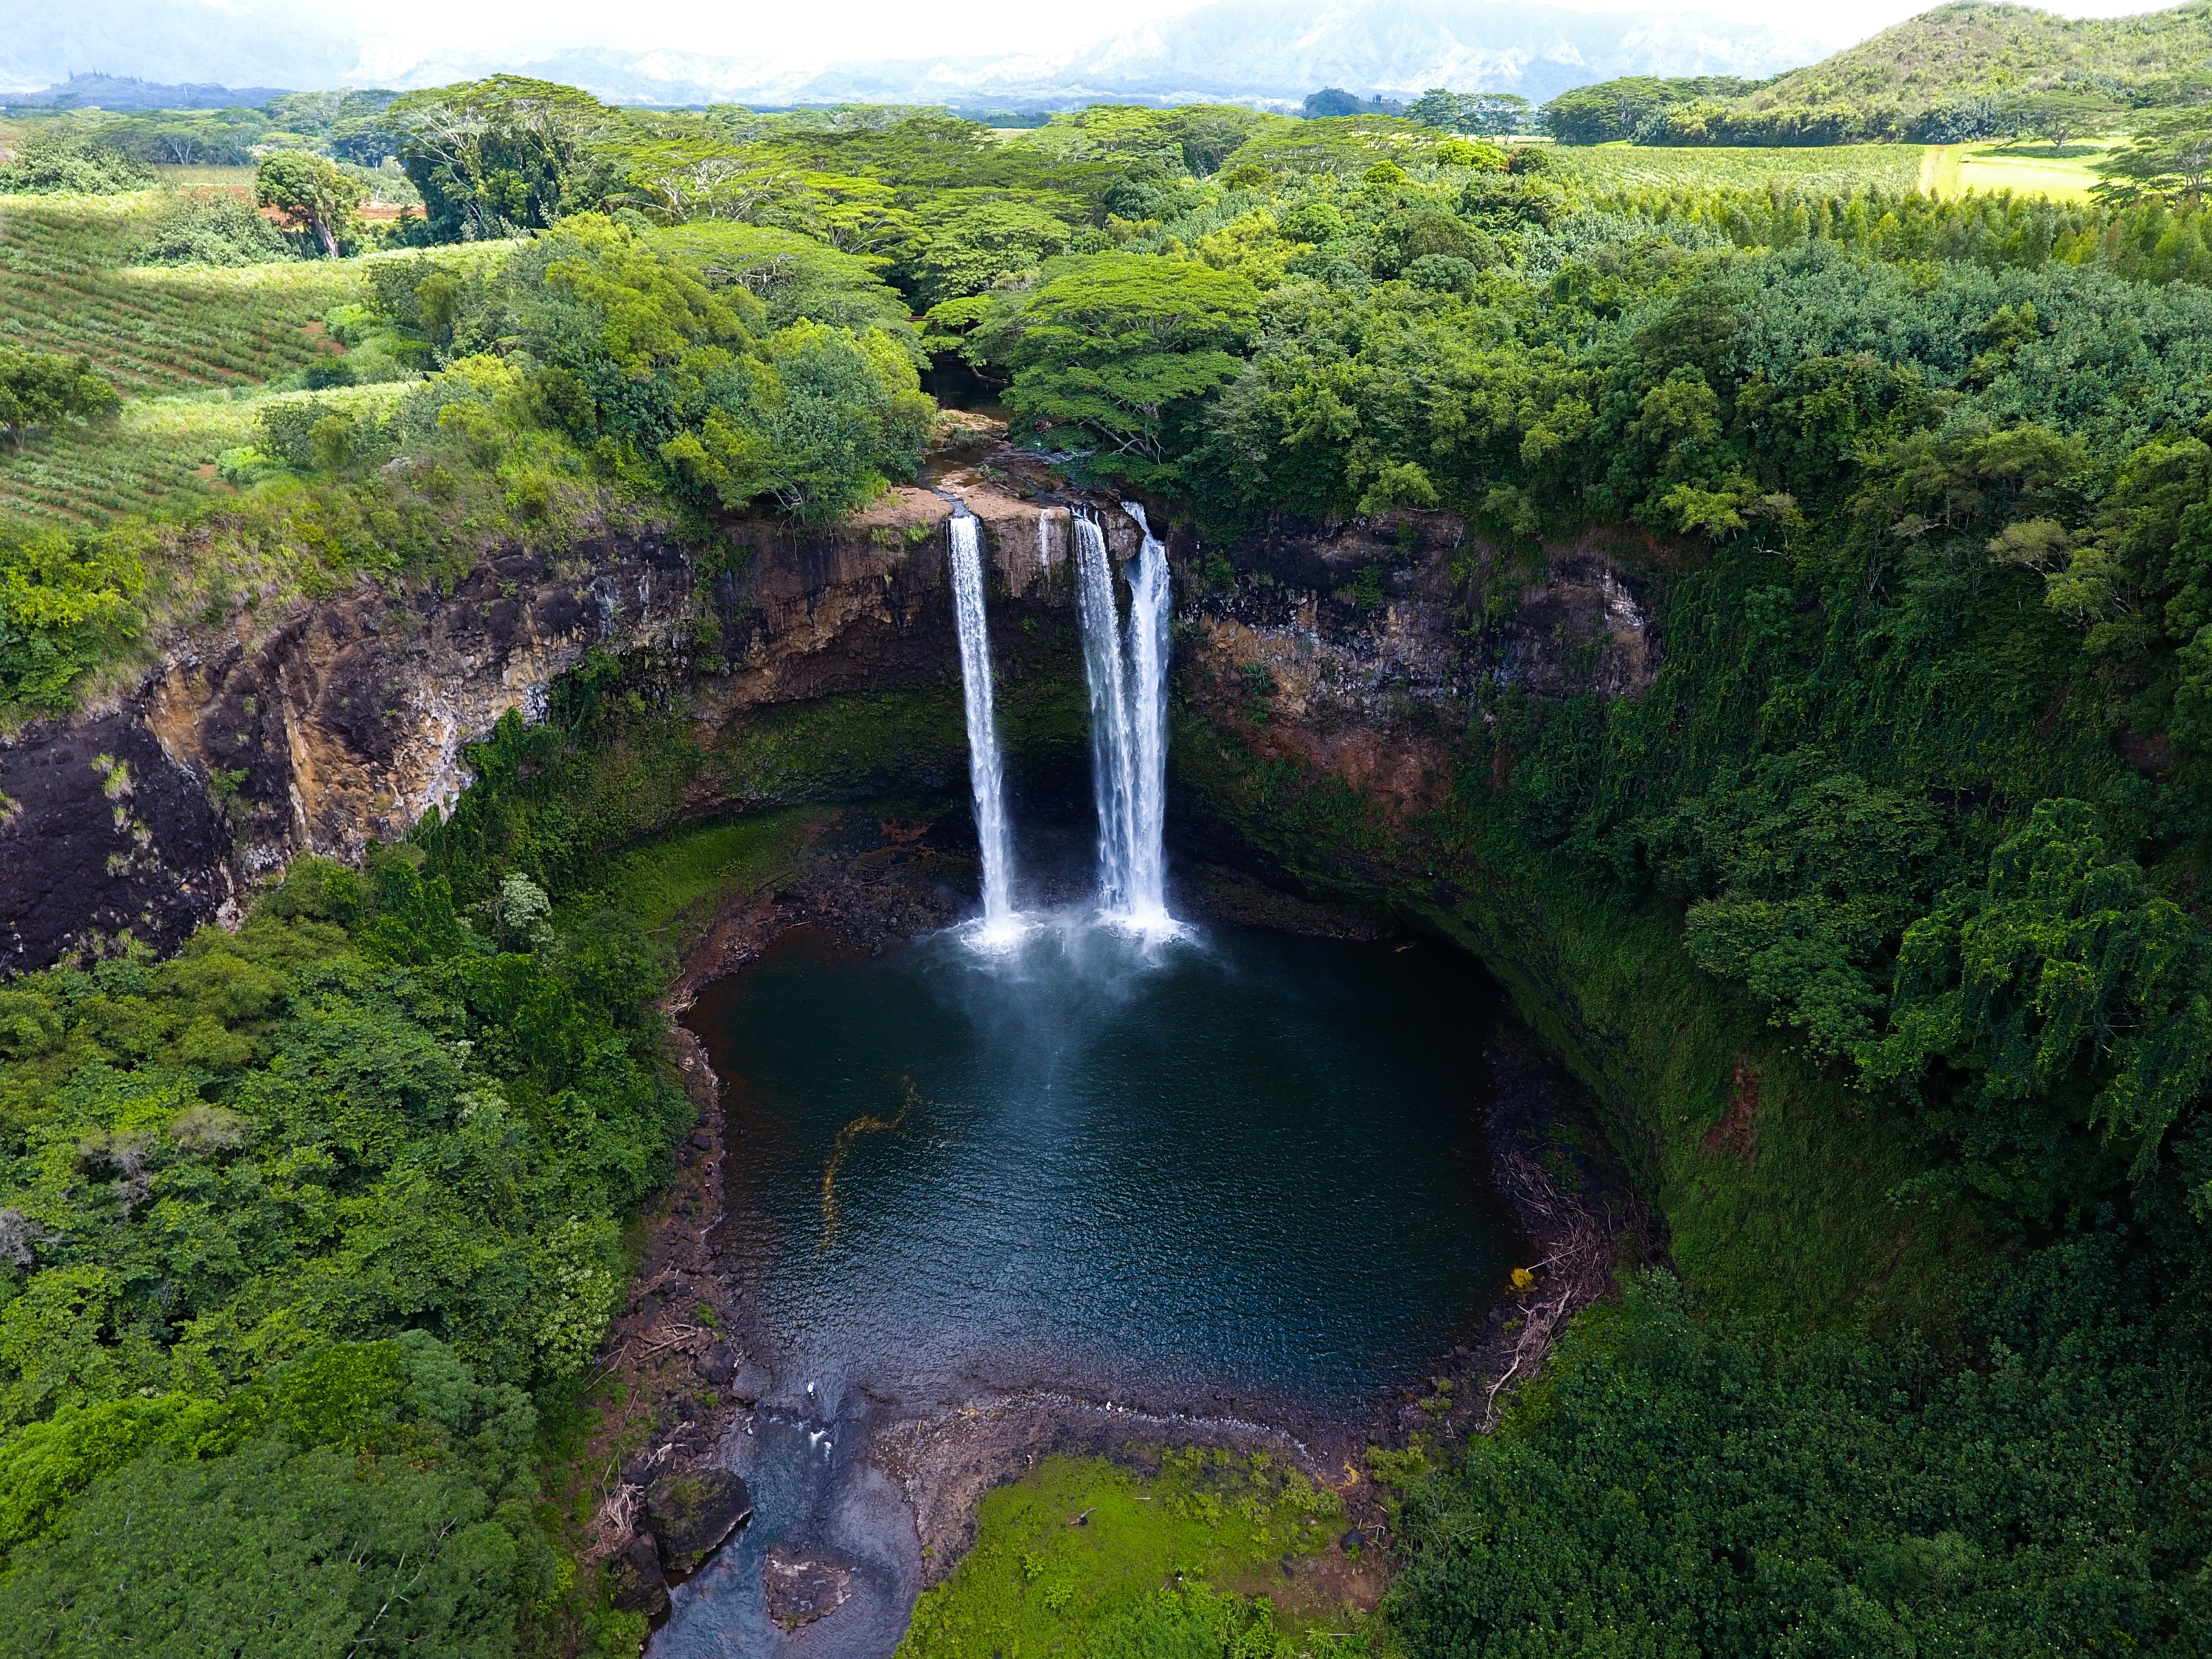 Waterfalls from above